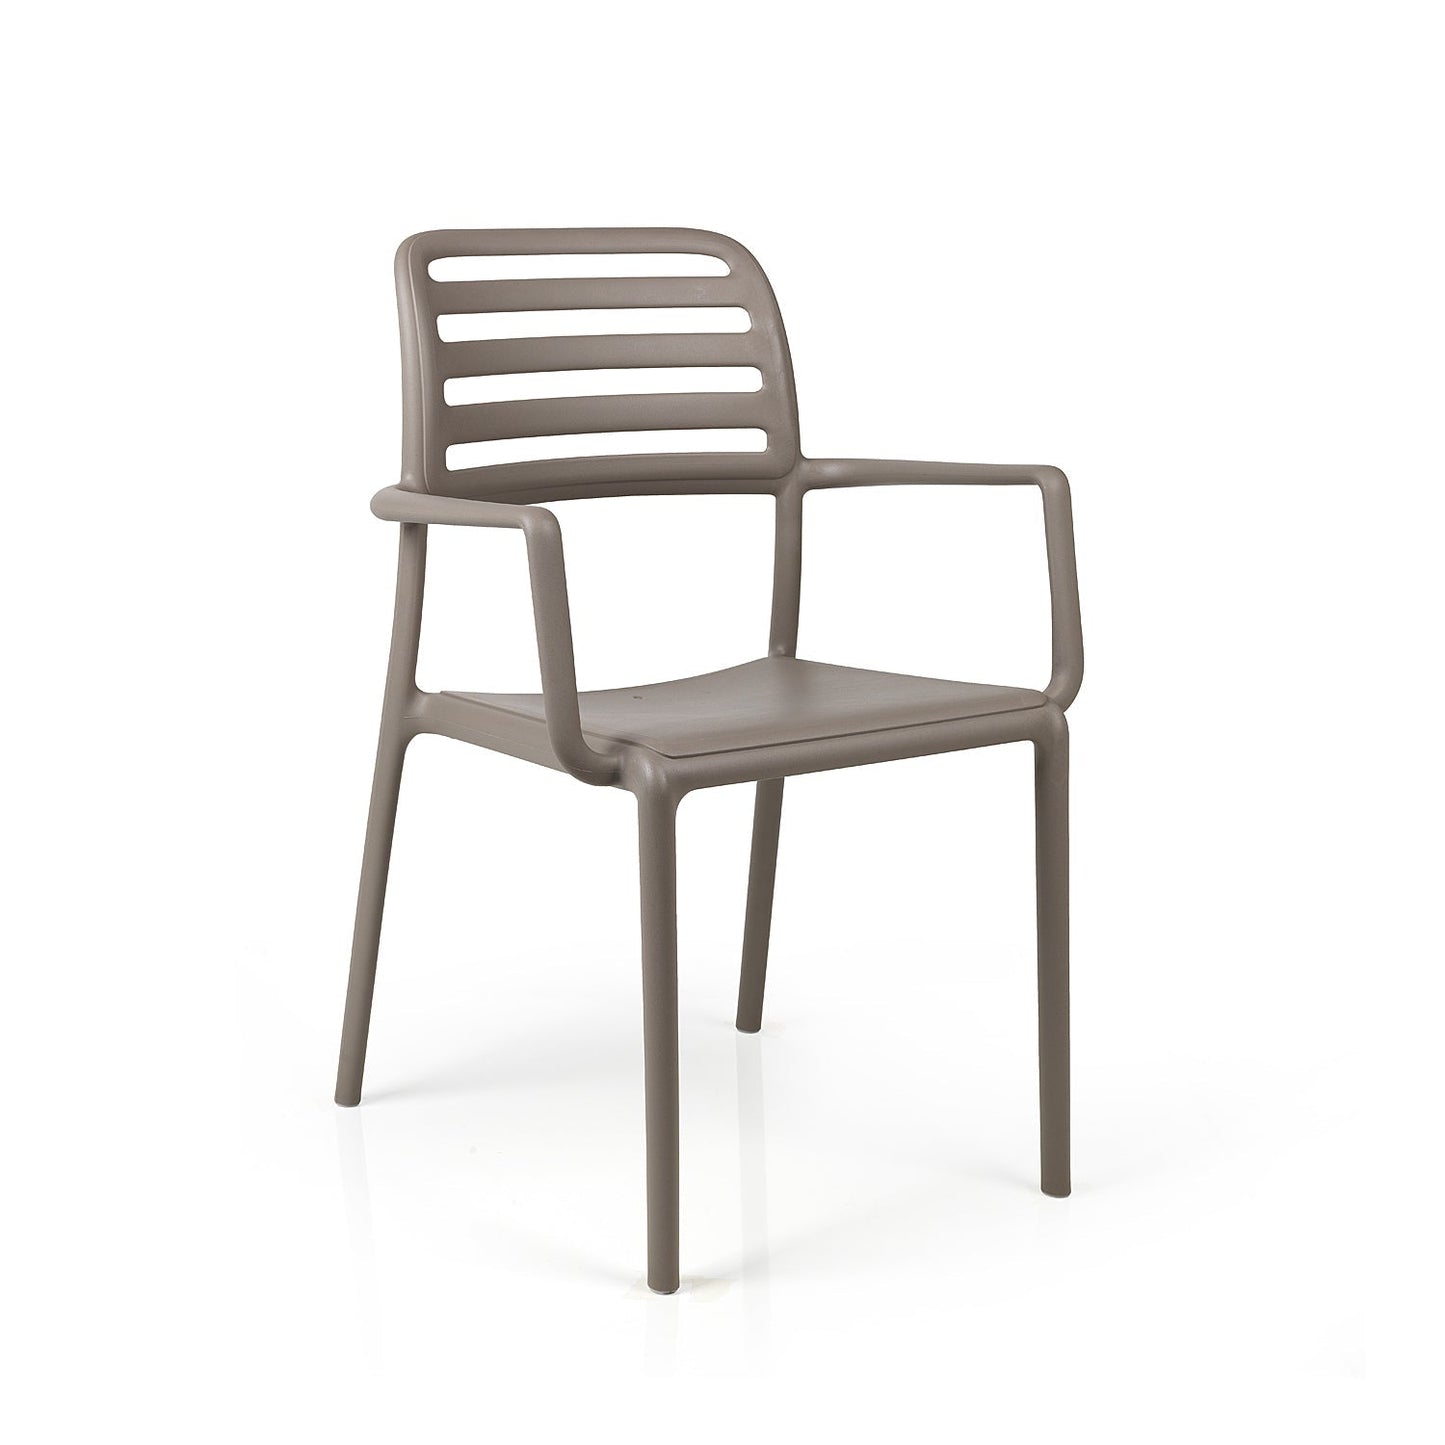 Costa Garden Chair By Nardi - Taupe